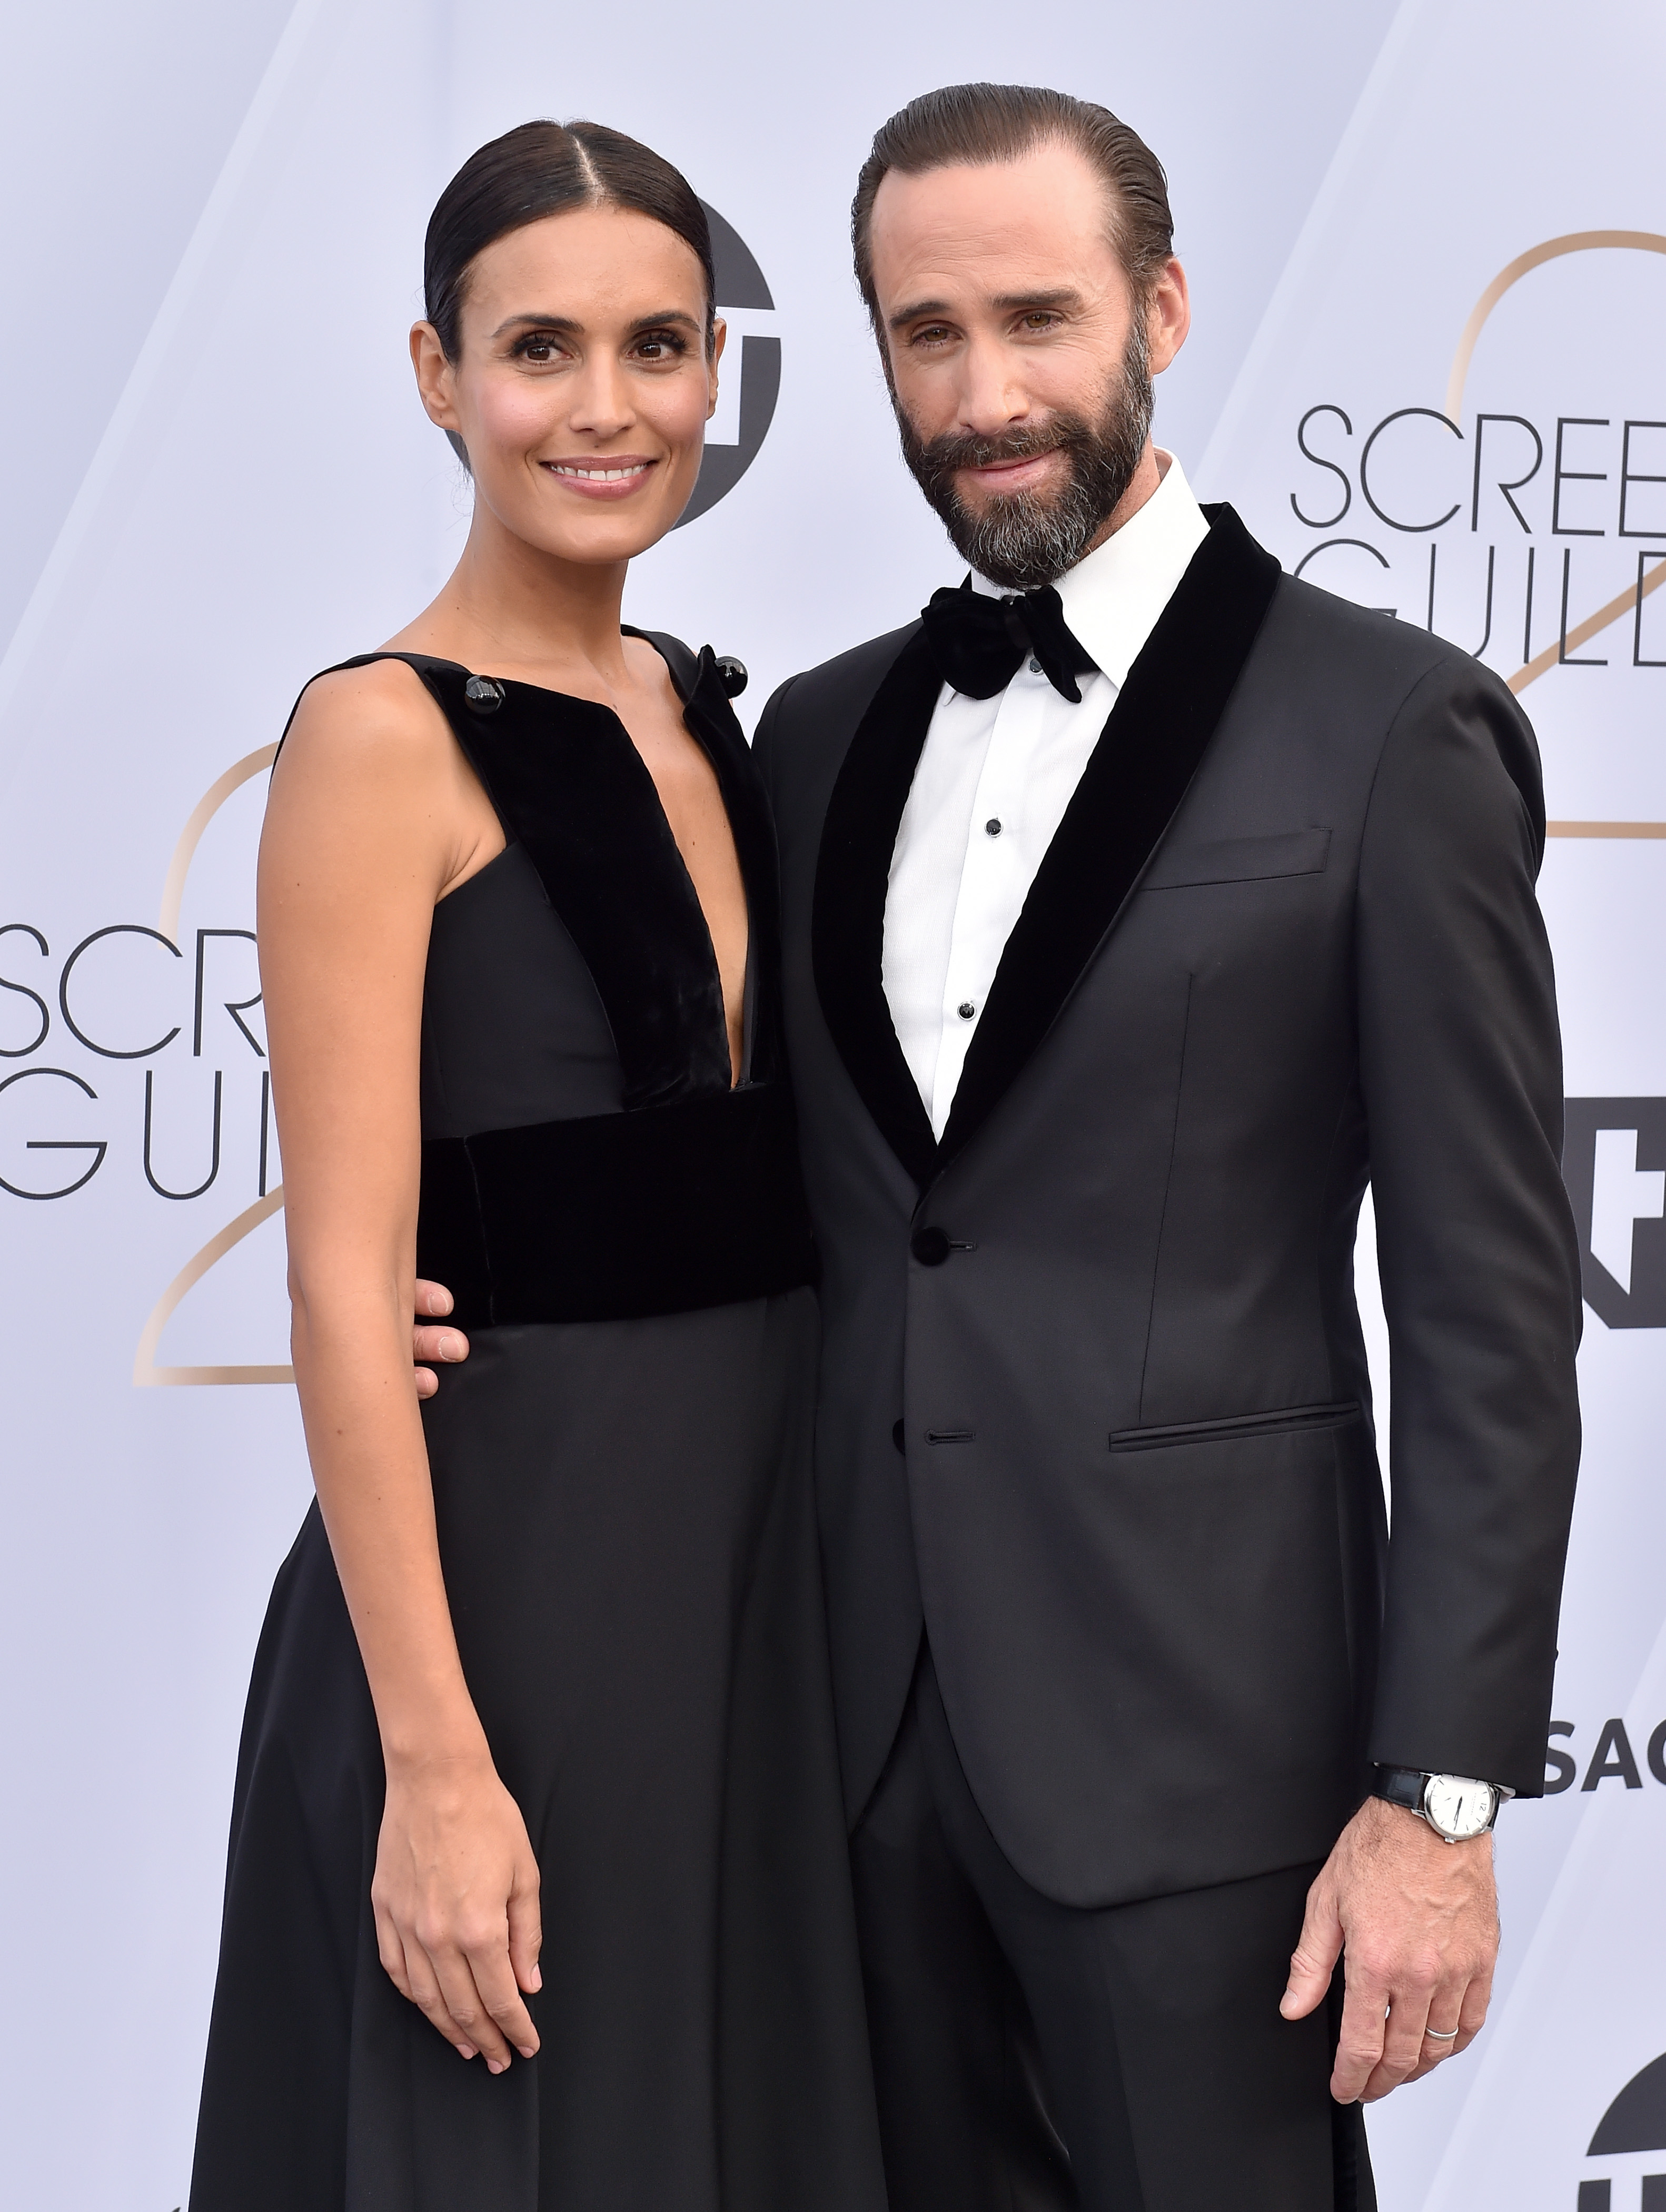 Maria Dolores Dieguez and Joseph Fiennes pose at the 25th Annual Screen Actors Guild Awards at The Shrine Auditorium on January 27, 2019, in Los Angeles, California | Source: Getty Images